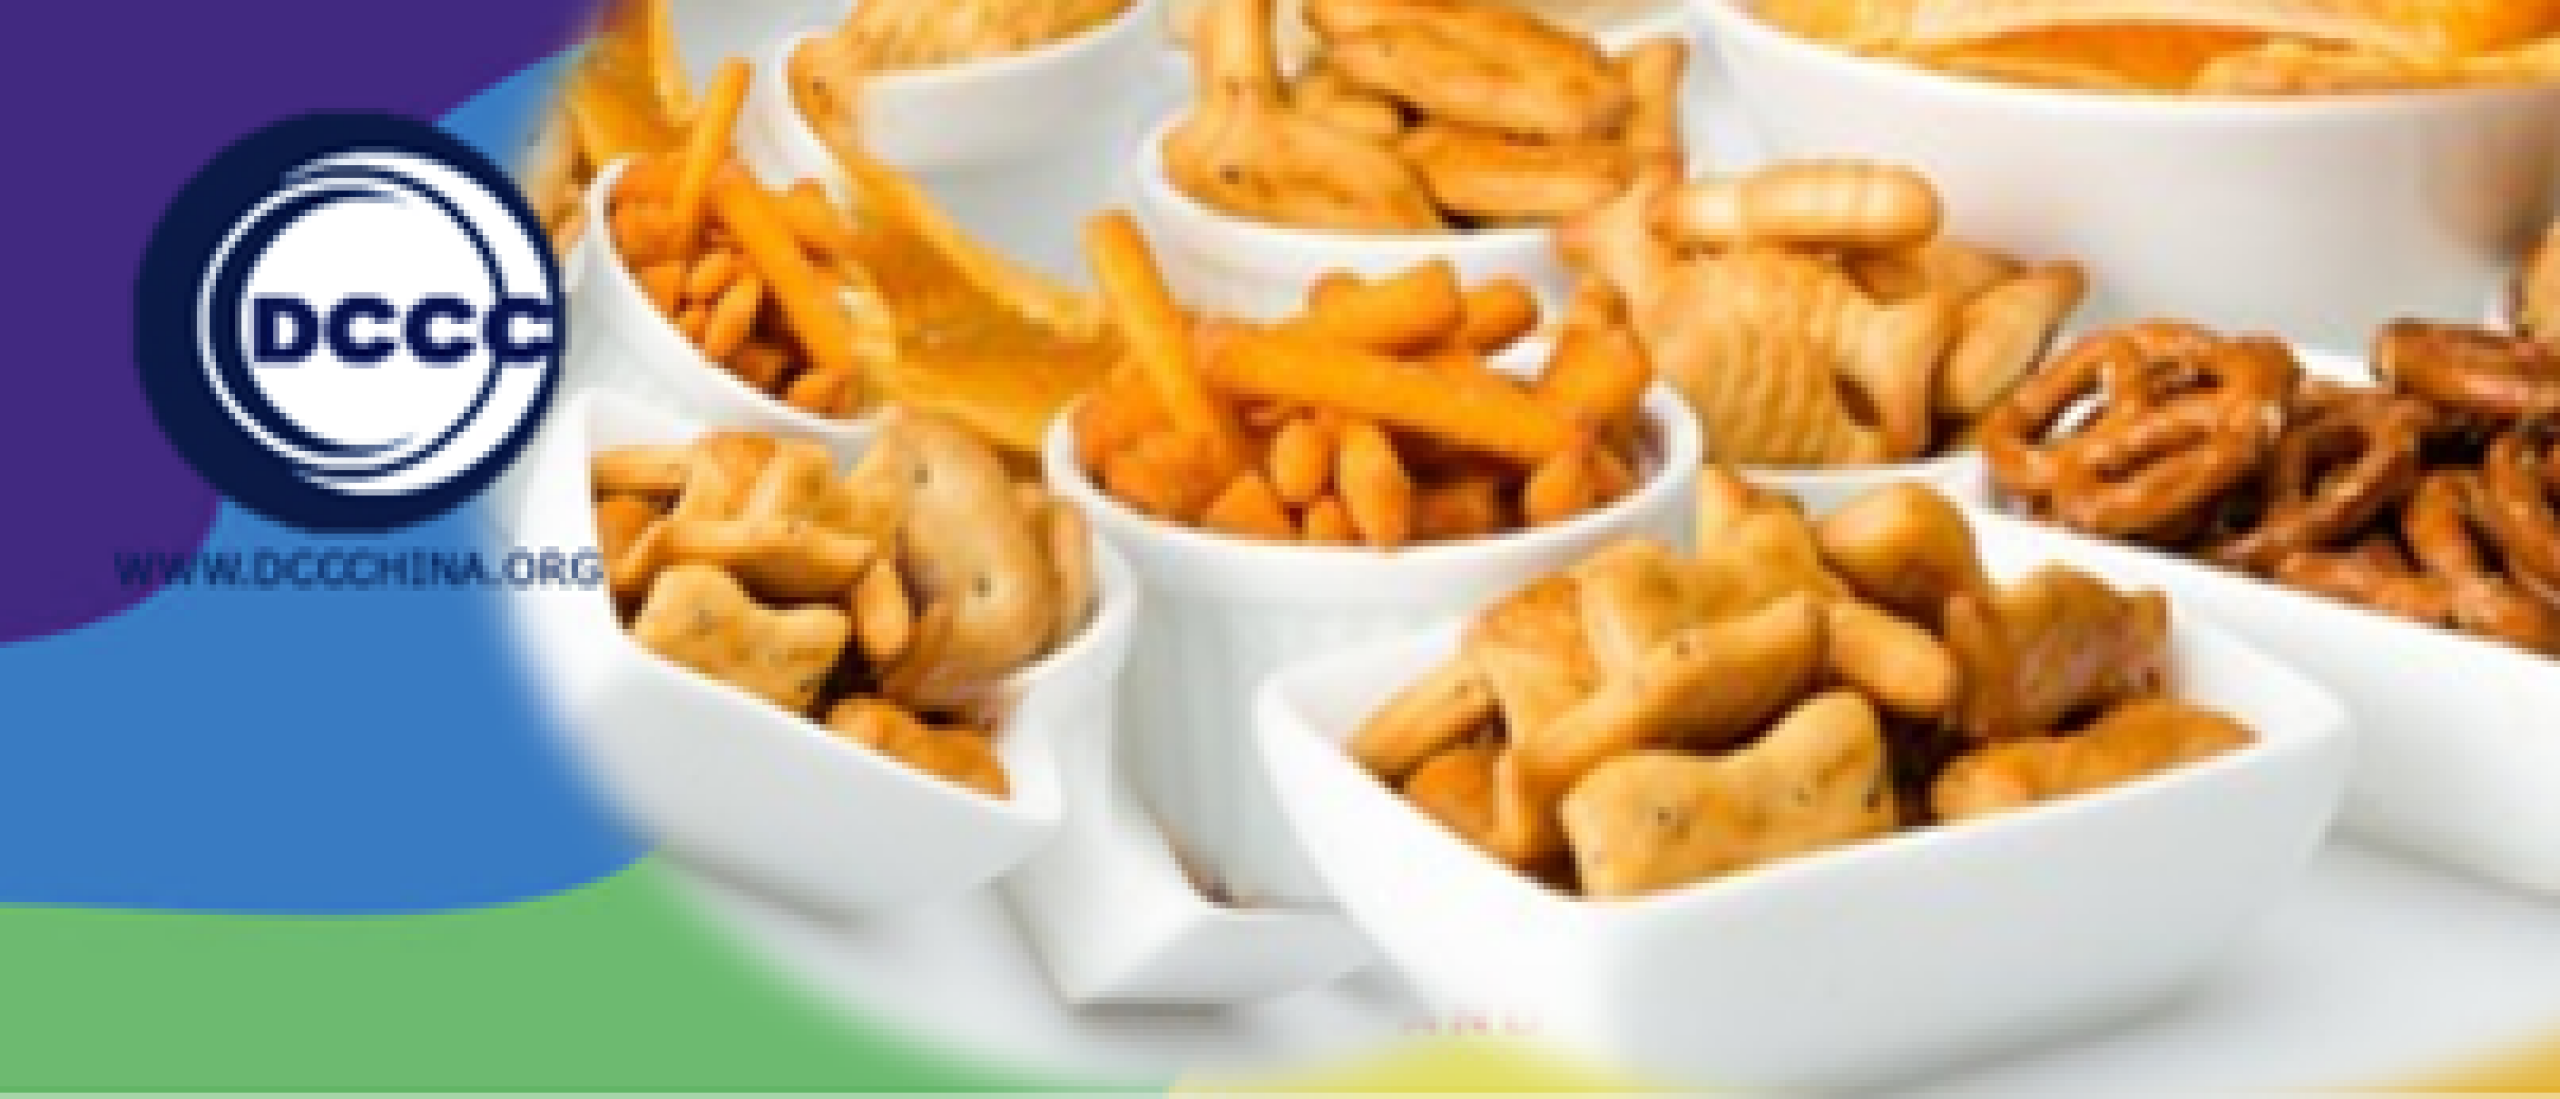 What role does nutrition value play in children’s snacks in China?